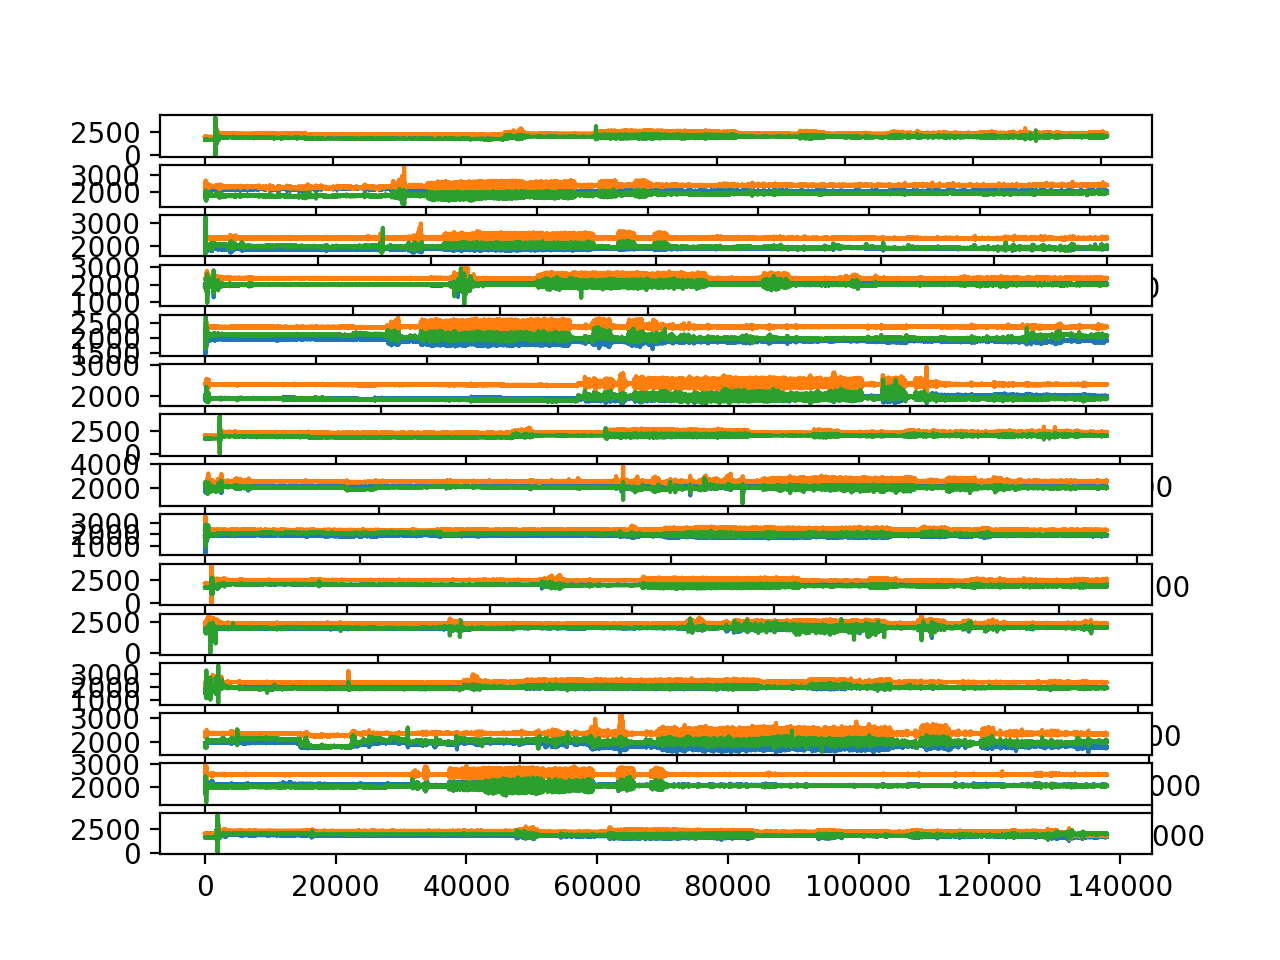 Line plots of accelerometer trace data for all 15 subjects.